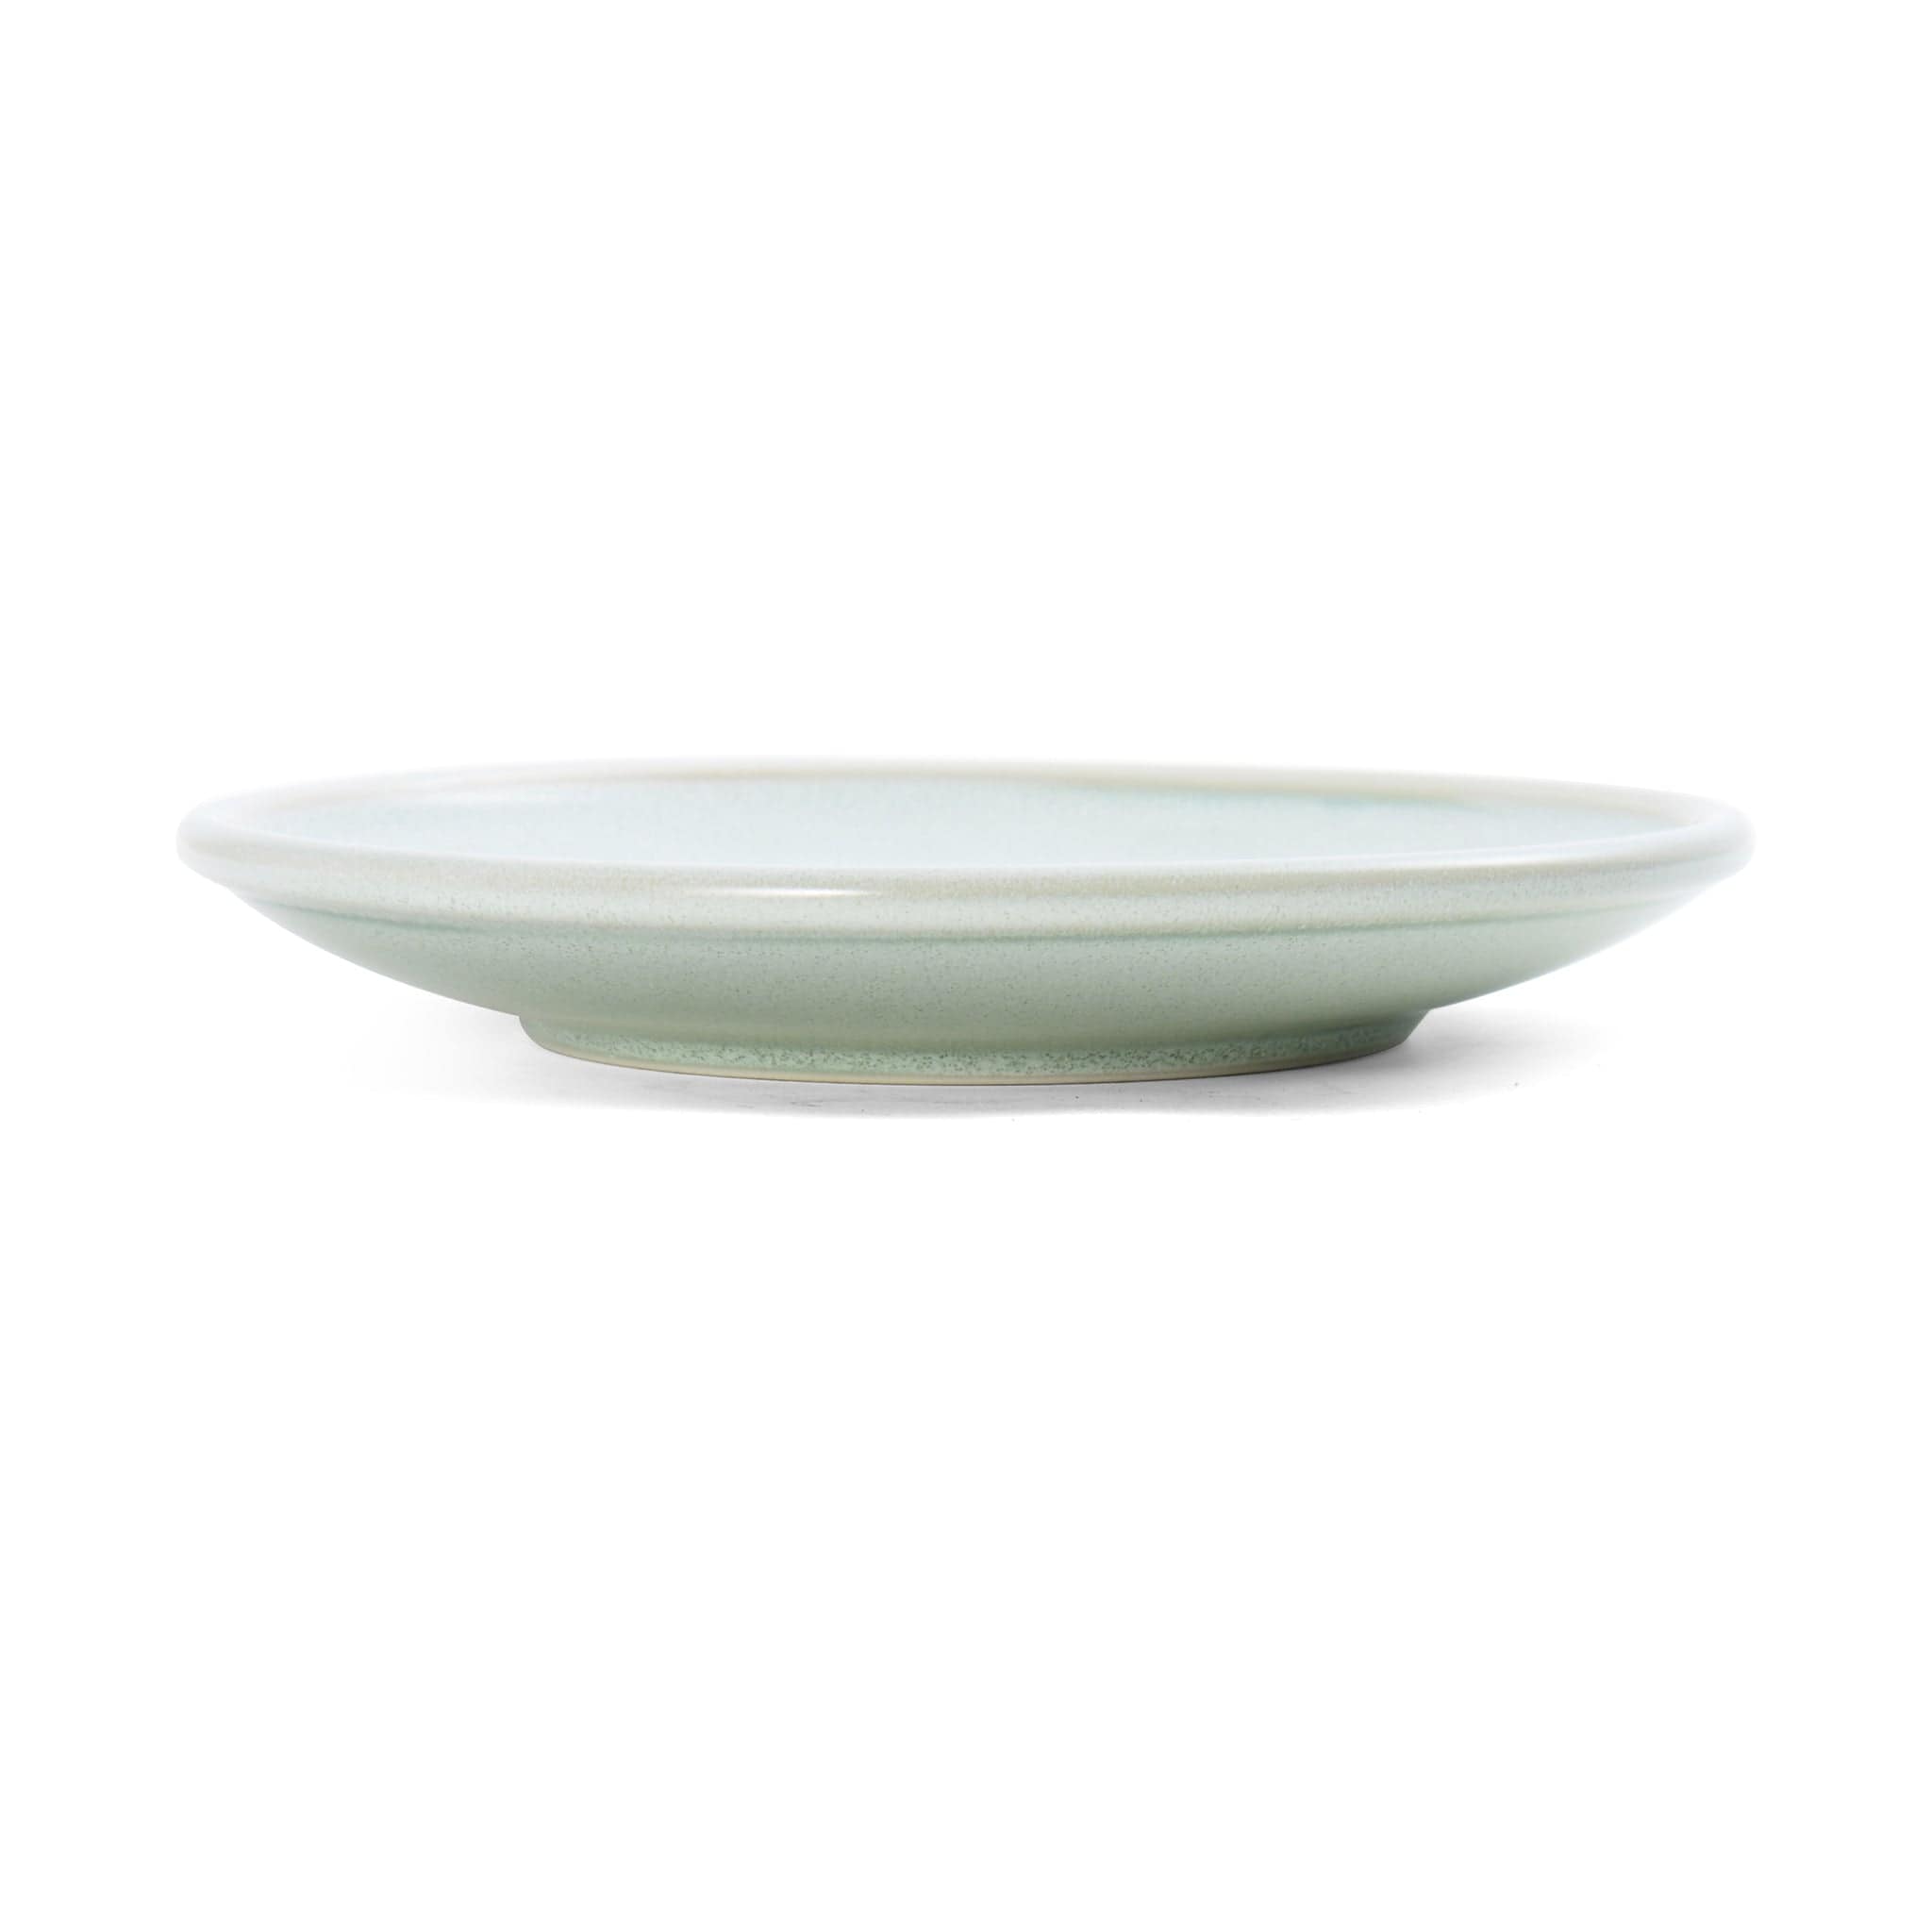 Jade Porcelain Coupe Plate 7.25" Green